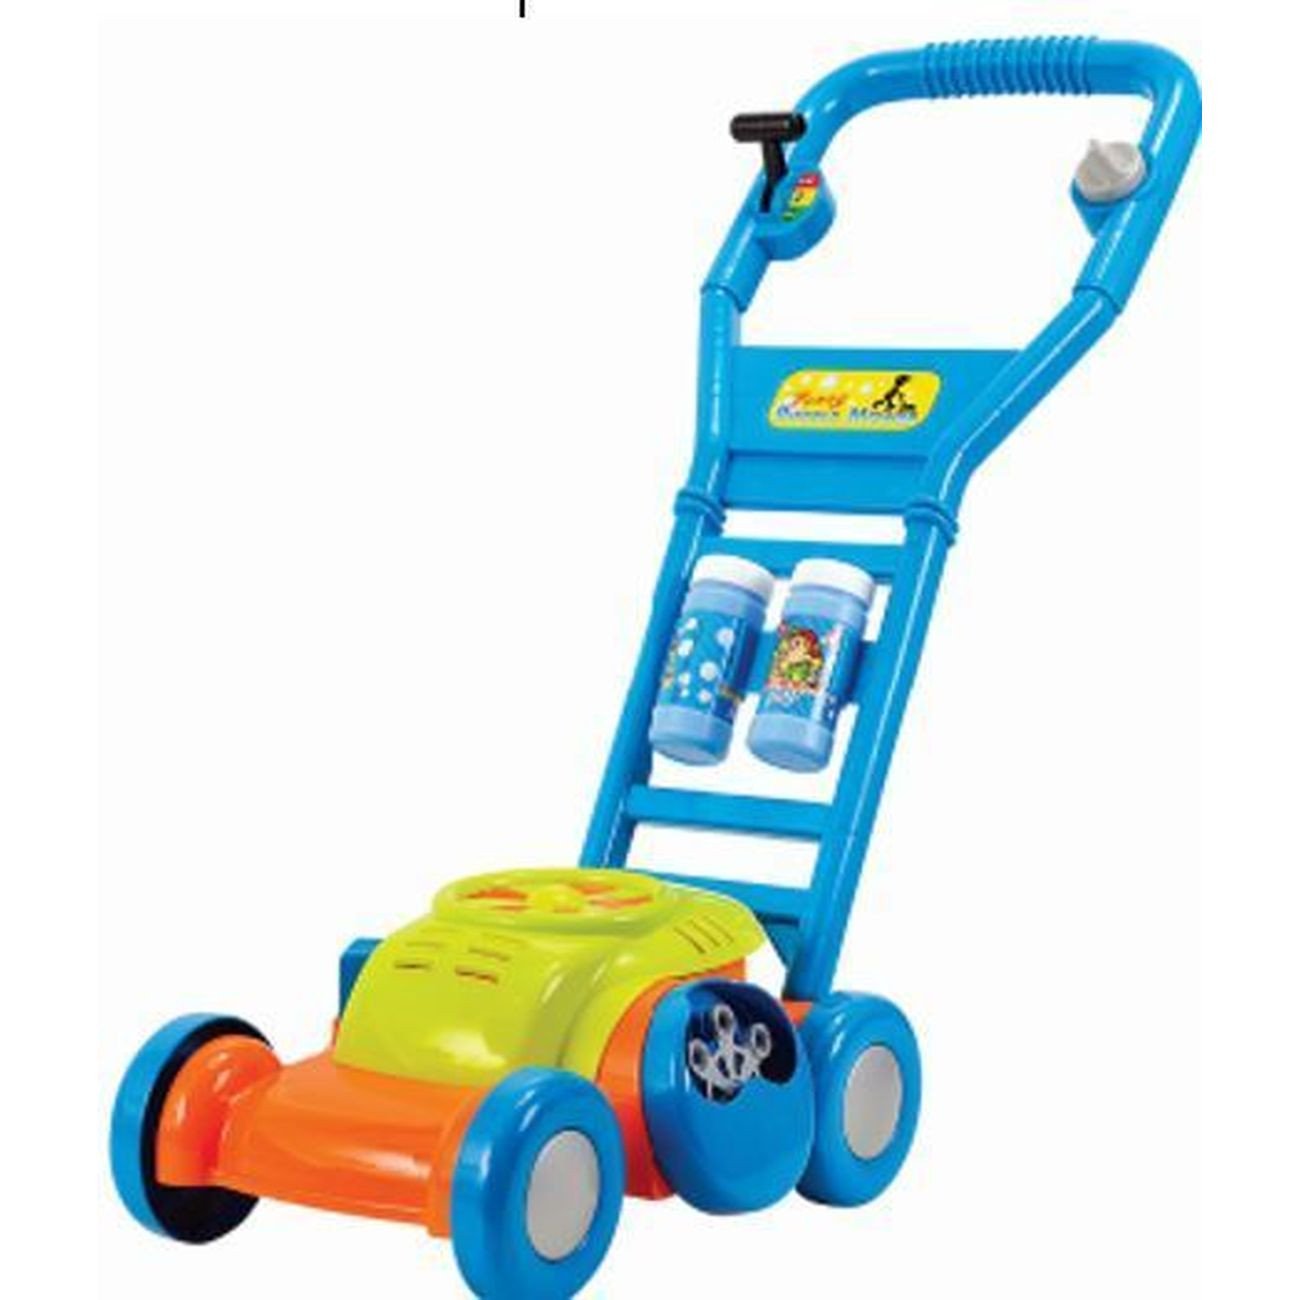 PLAYGO BUBBLE LAWN MOWER BATTERY OPERATED